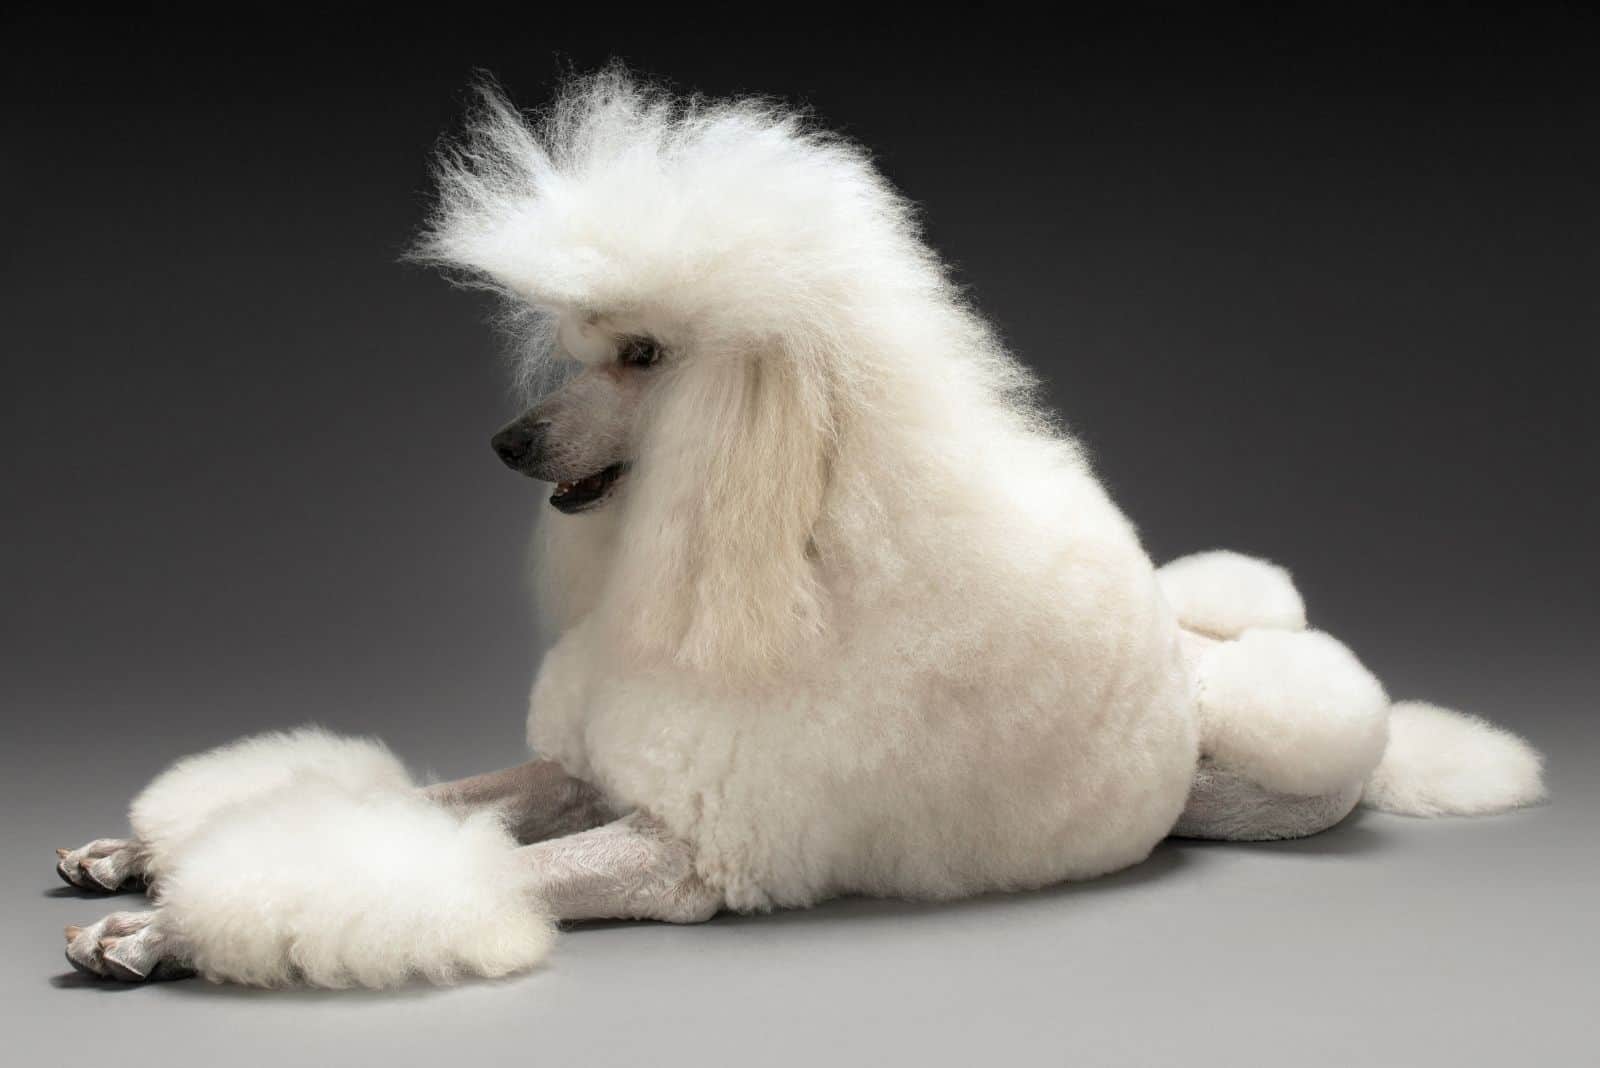 white poodle lying down in gray background